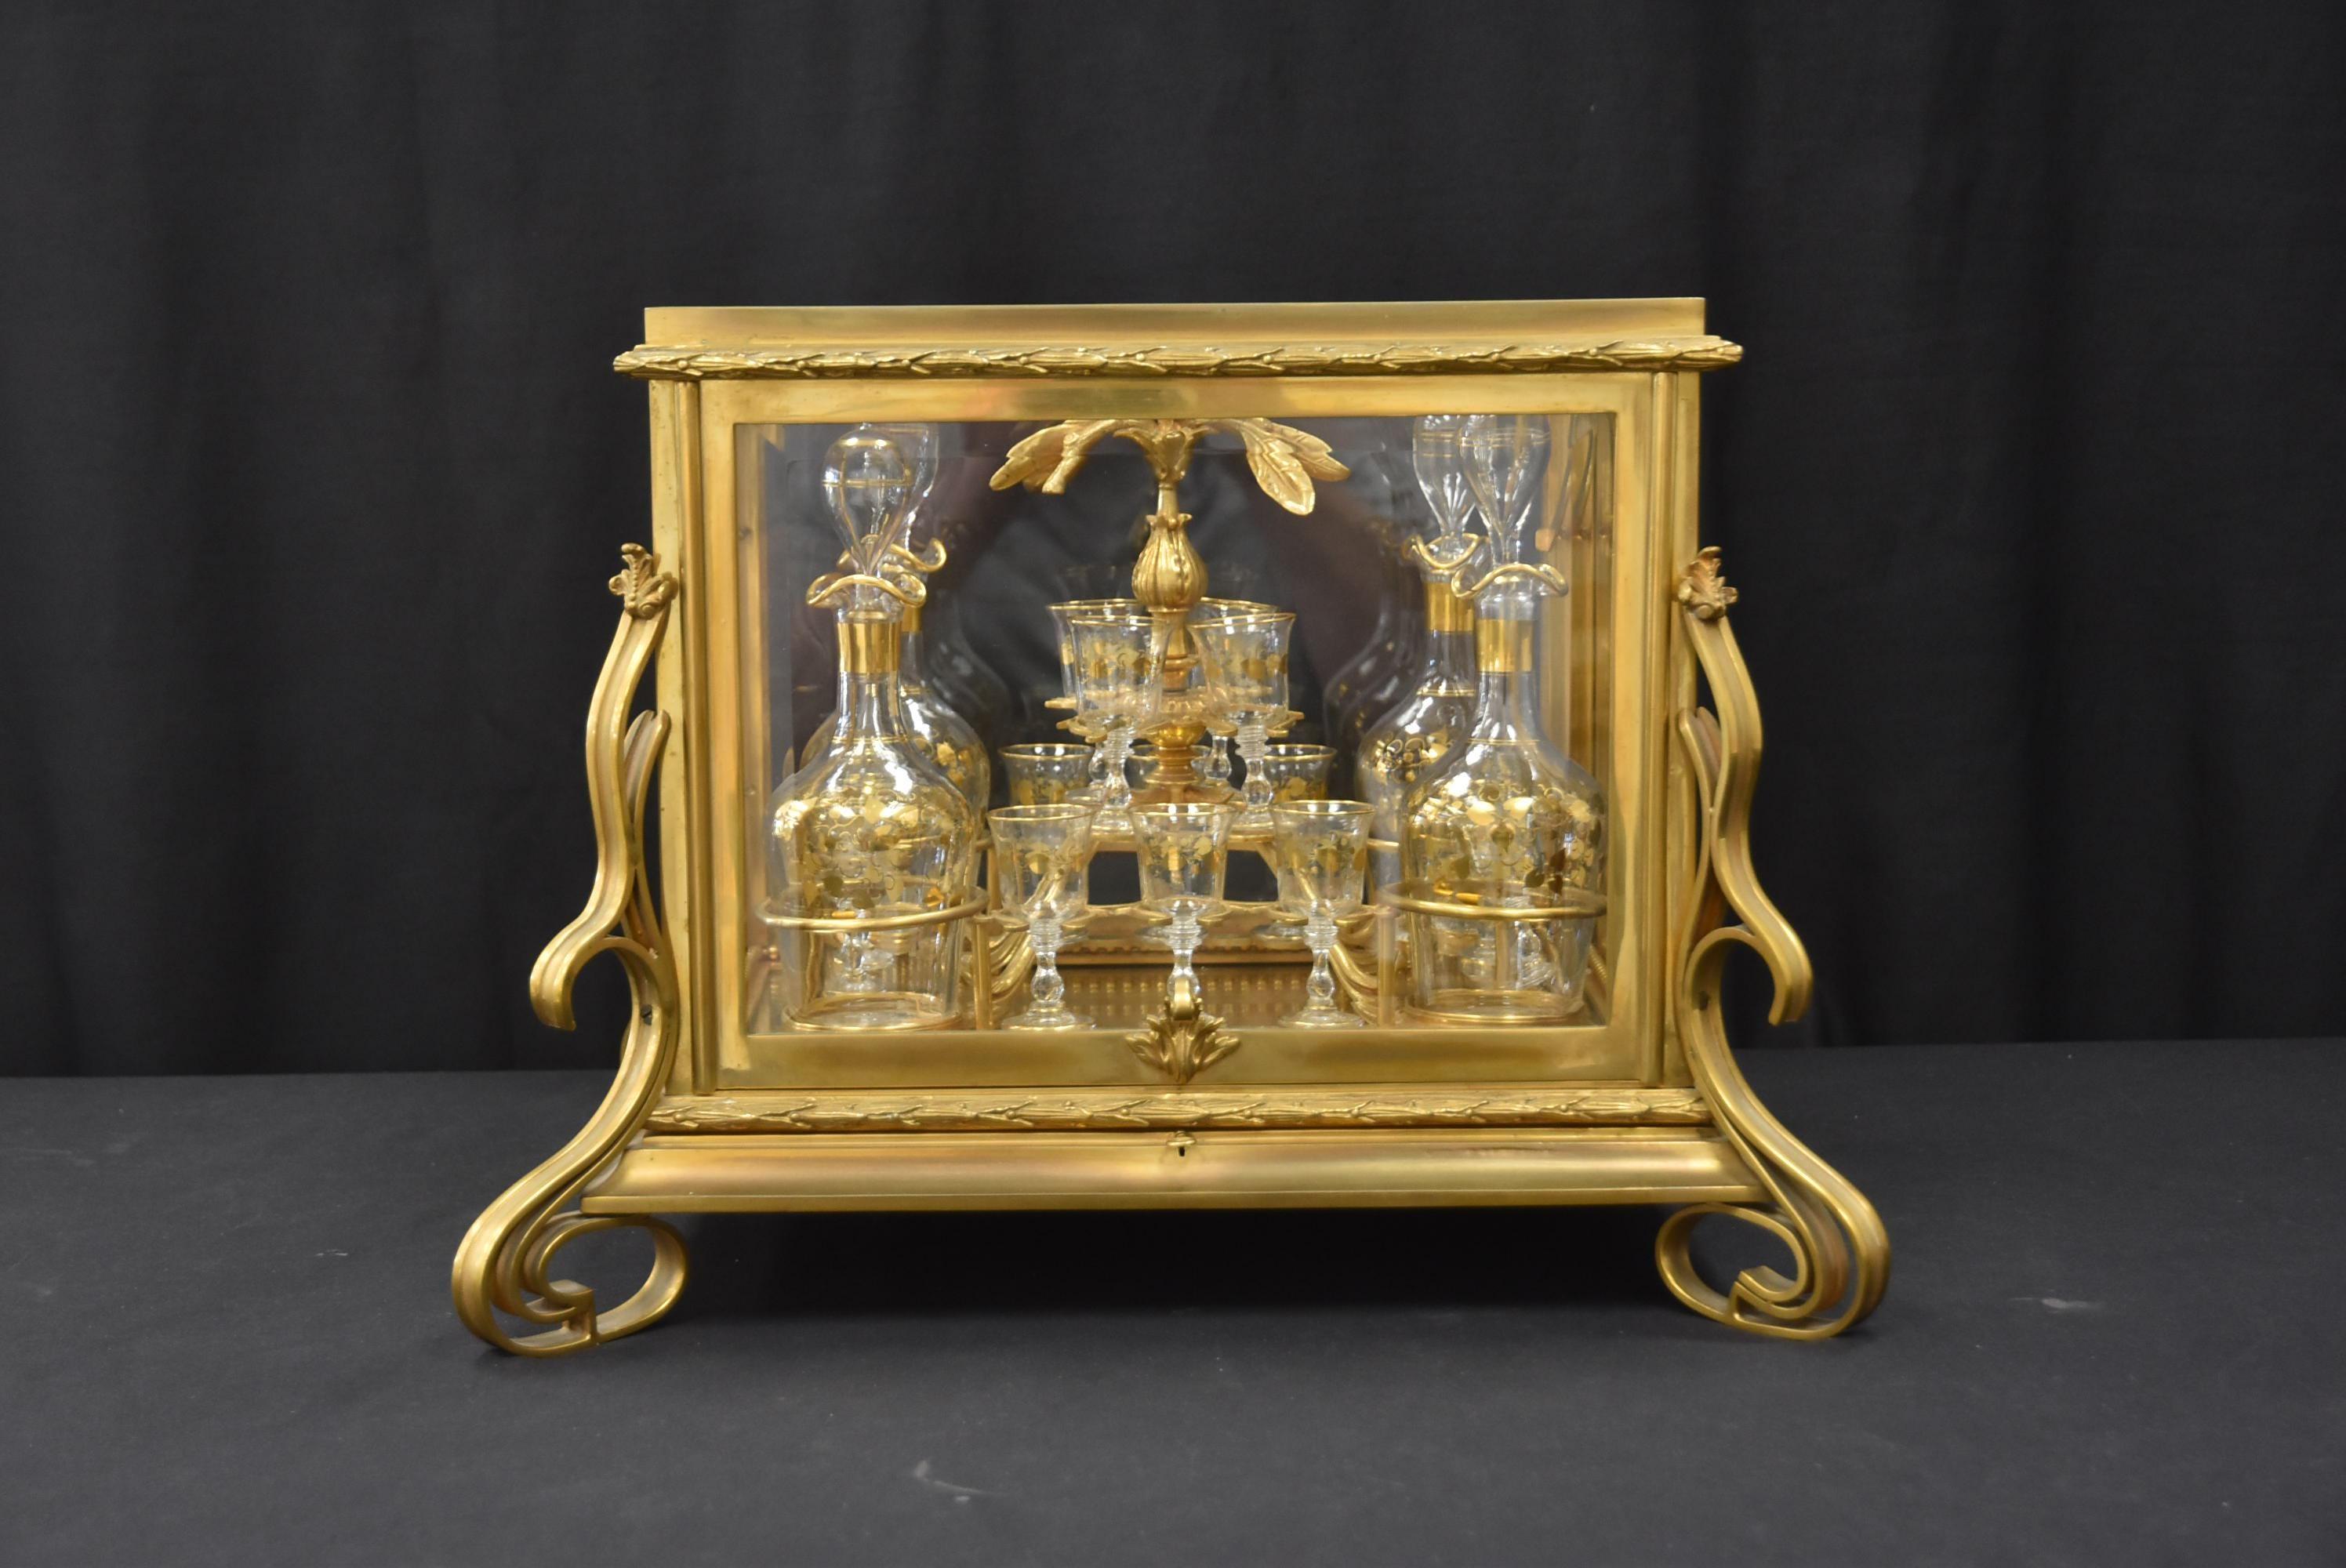 19th century French bronze & glass tantalus set with (4) gold decorated glass decanters with (14) cordials glasses in fitted bronze insert set in French bronze & glass case - Measures: 18